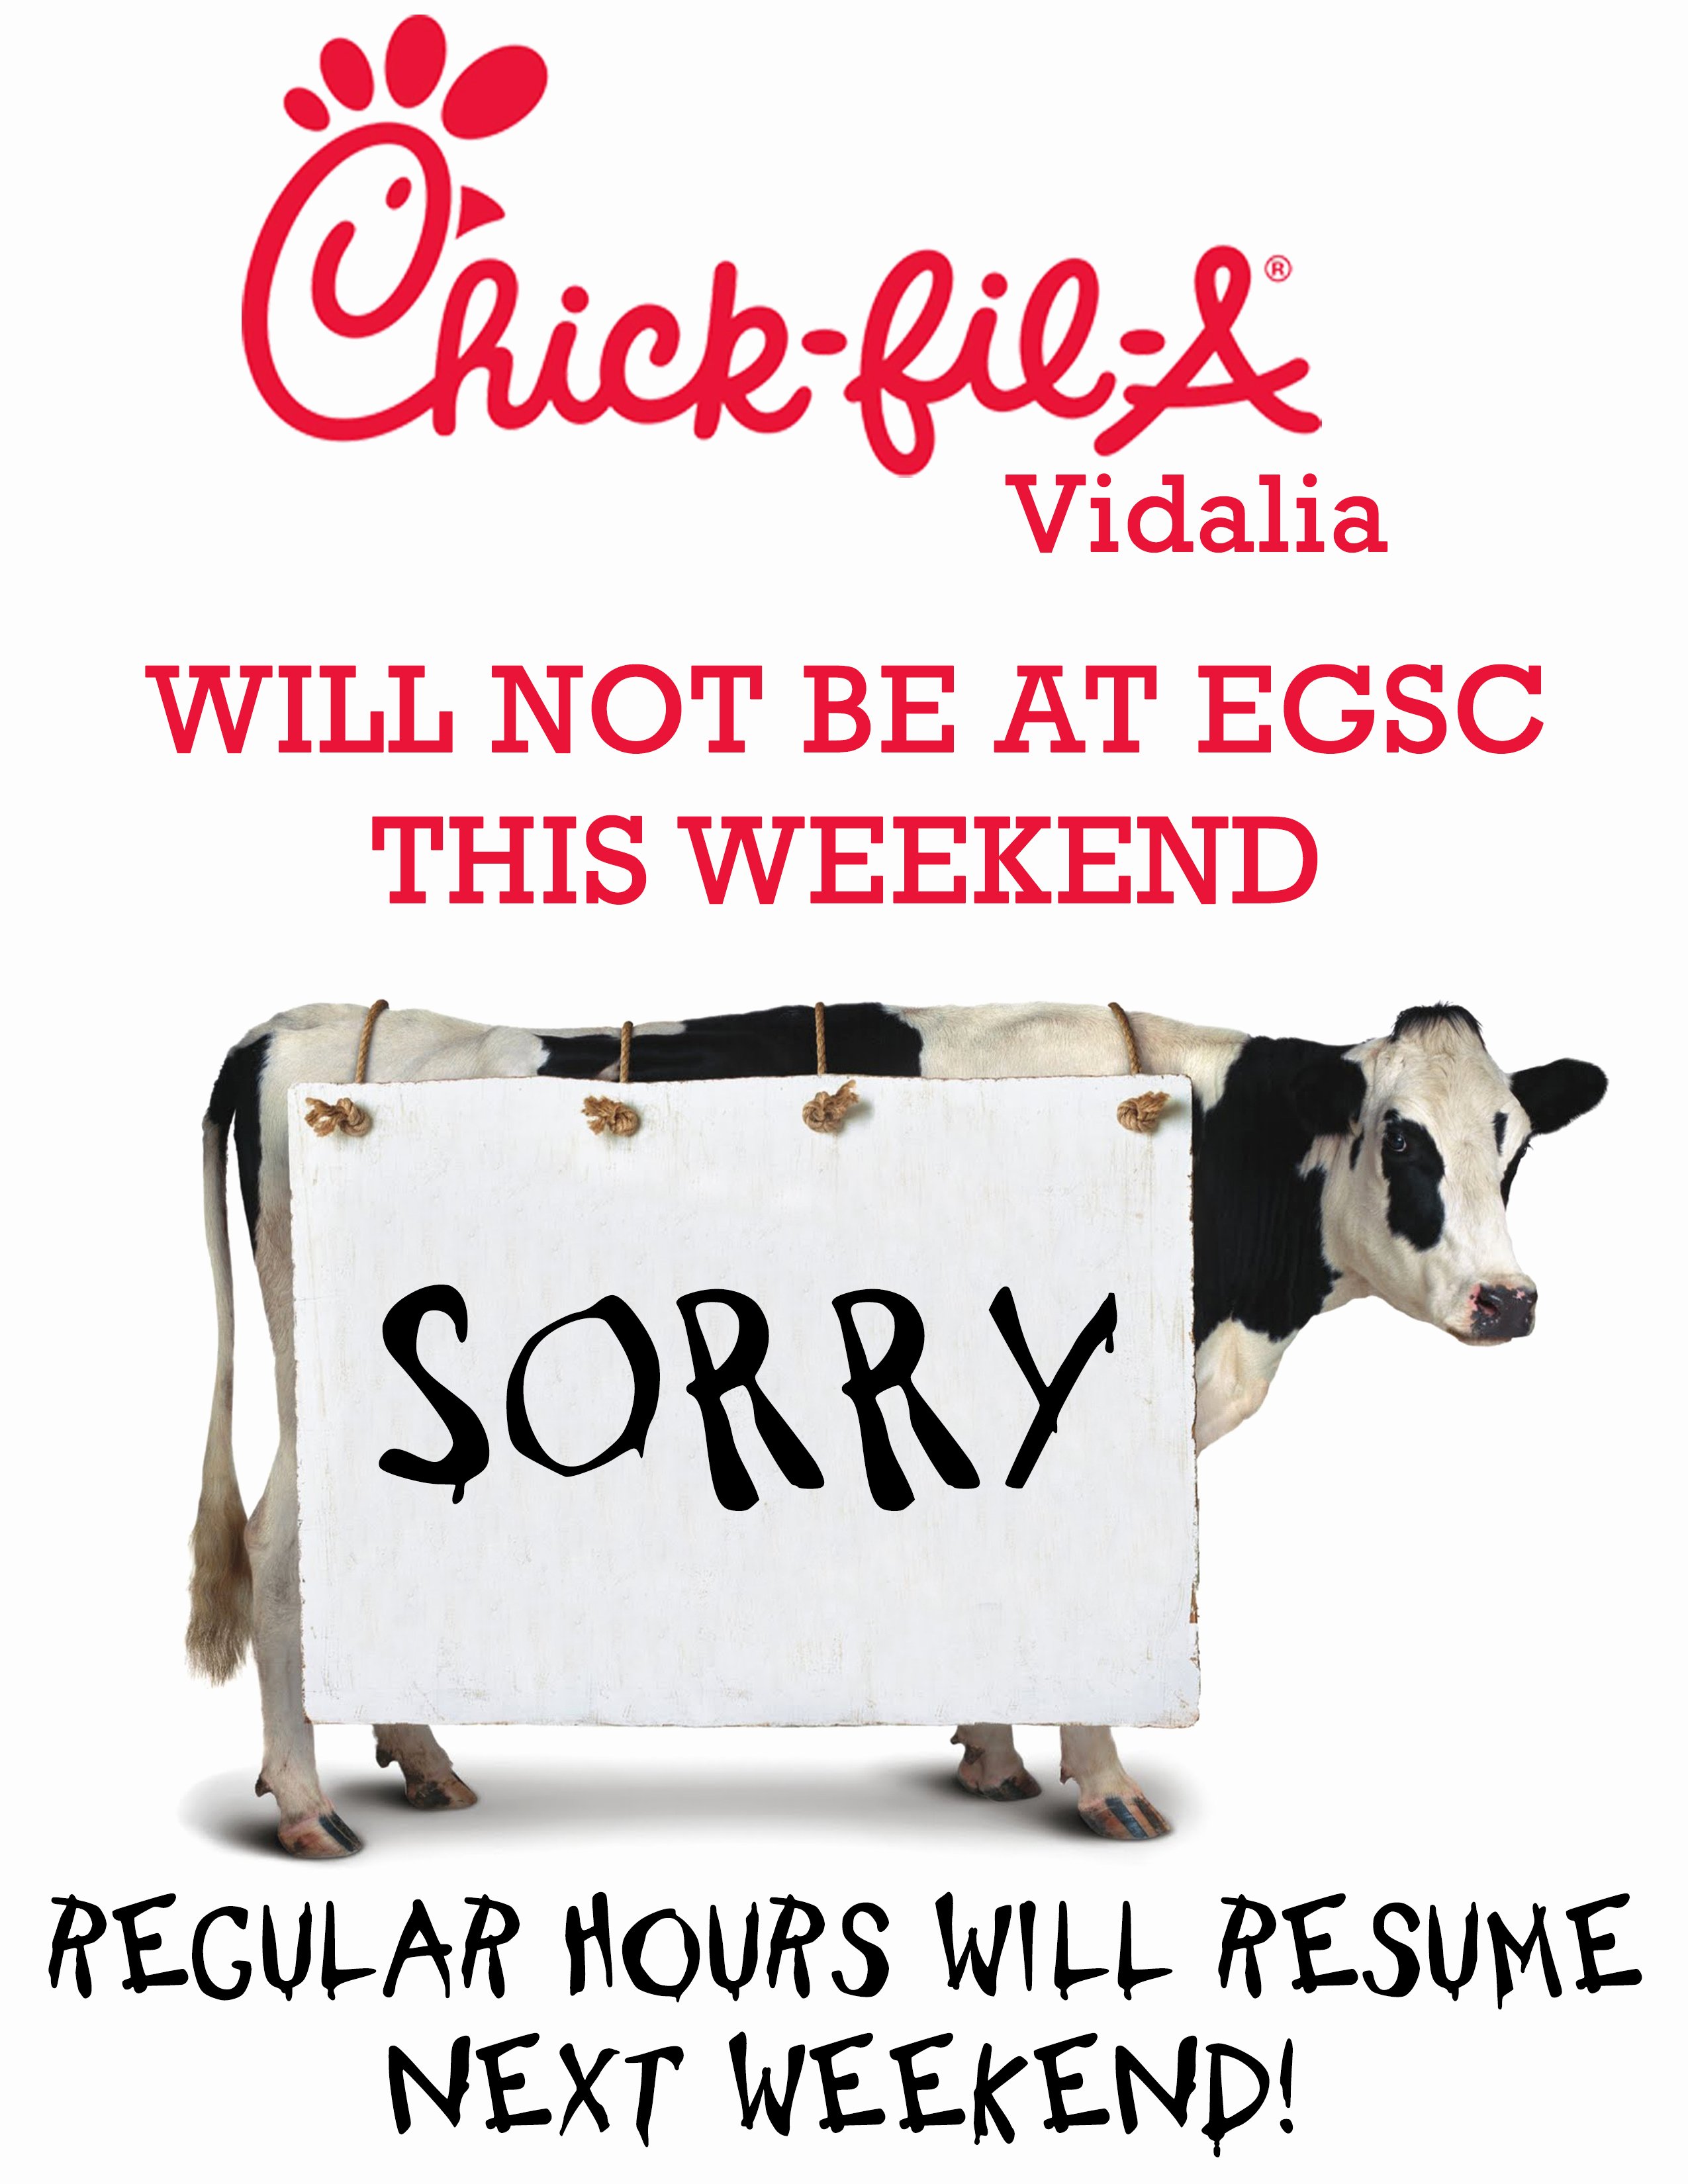 Chick Fil A Will Not Be On Egsc’s Campus This Weekend